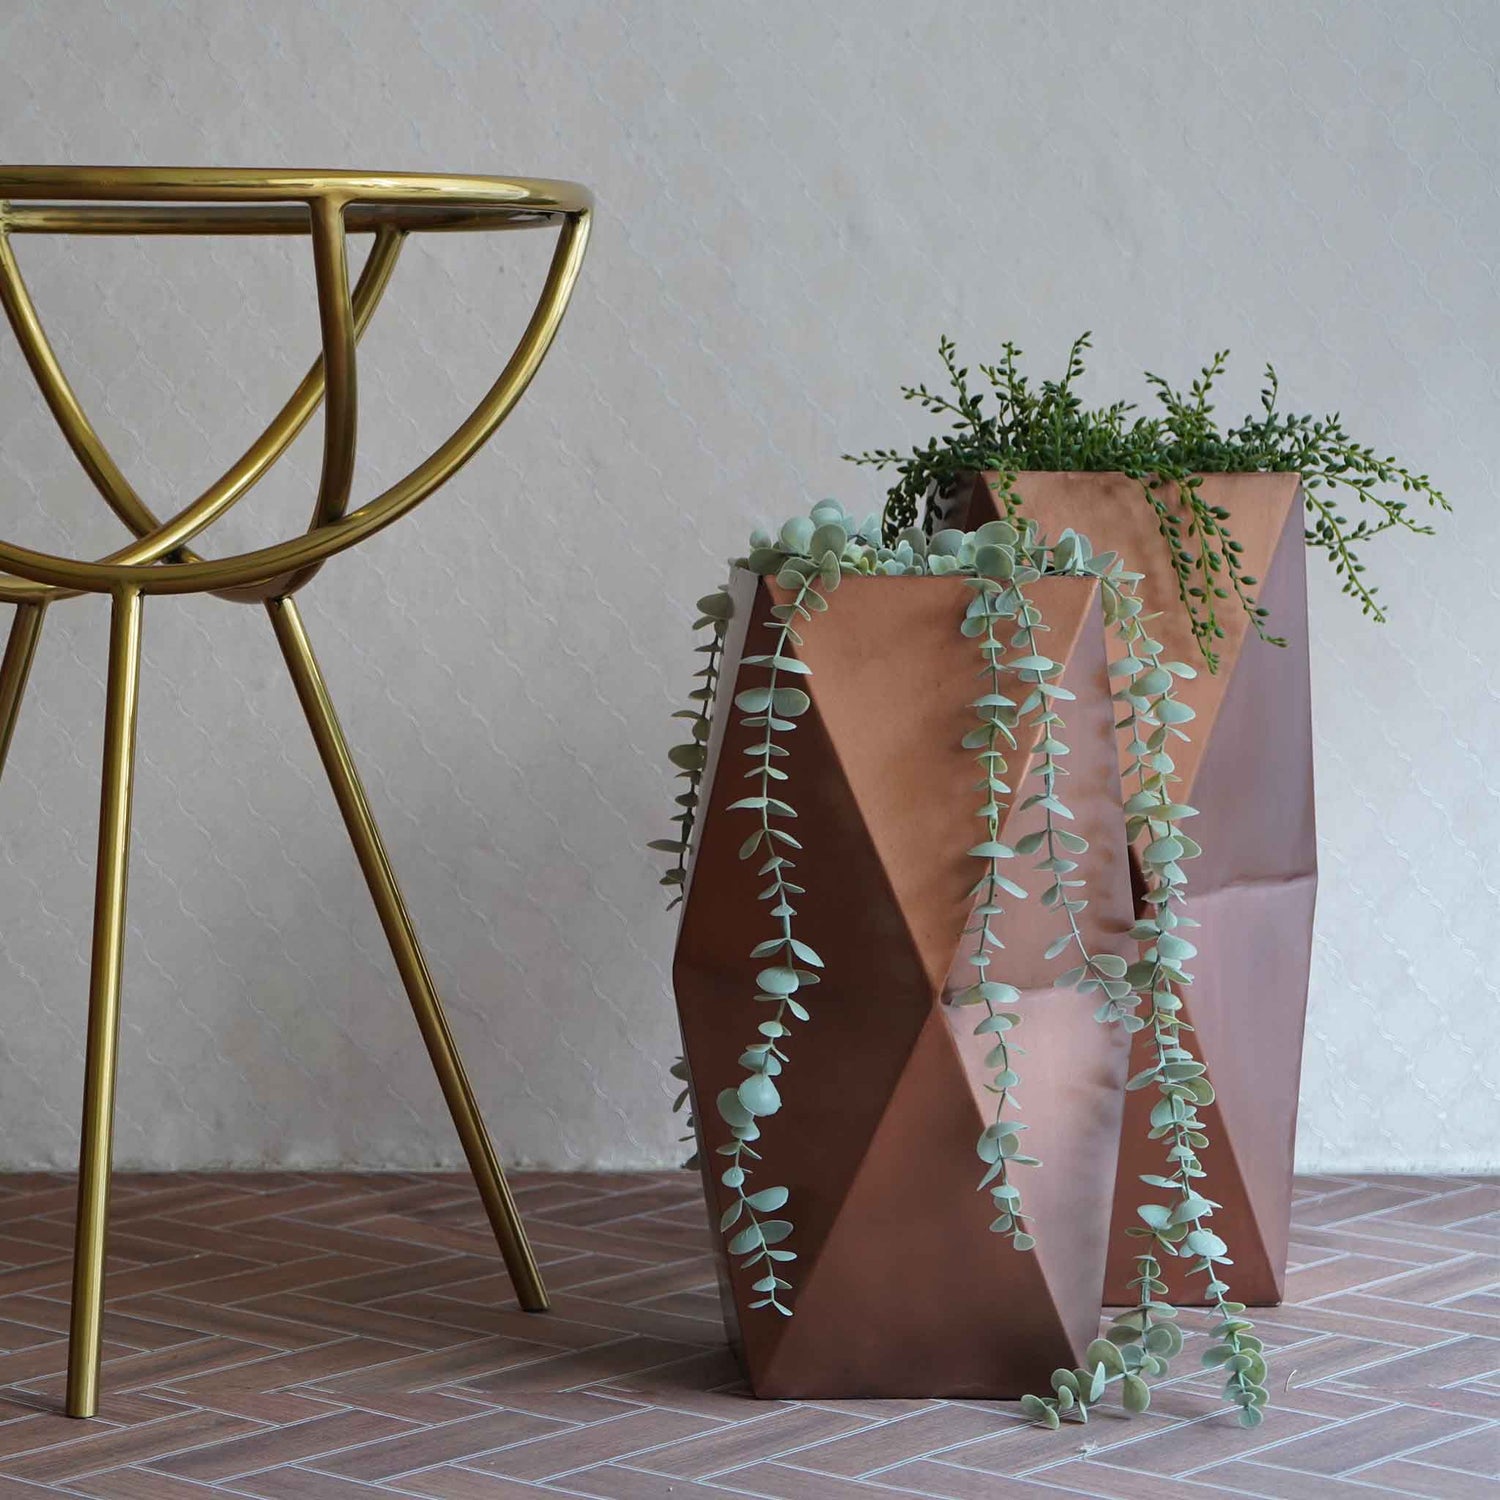 Two large hexagonal metallic vases in copper finish placed on the floor next to a table.